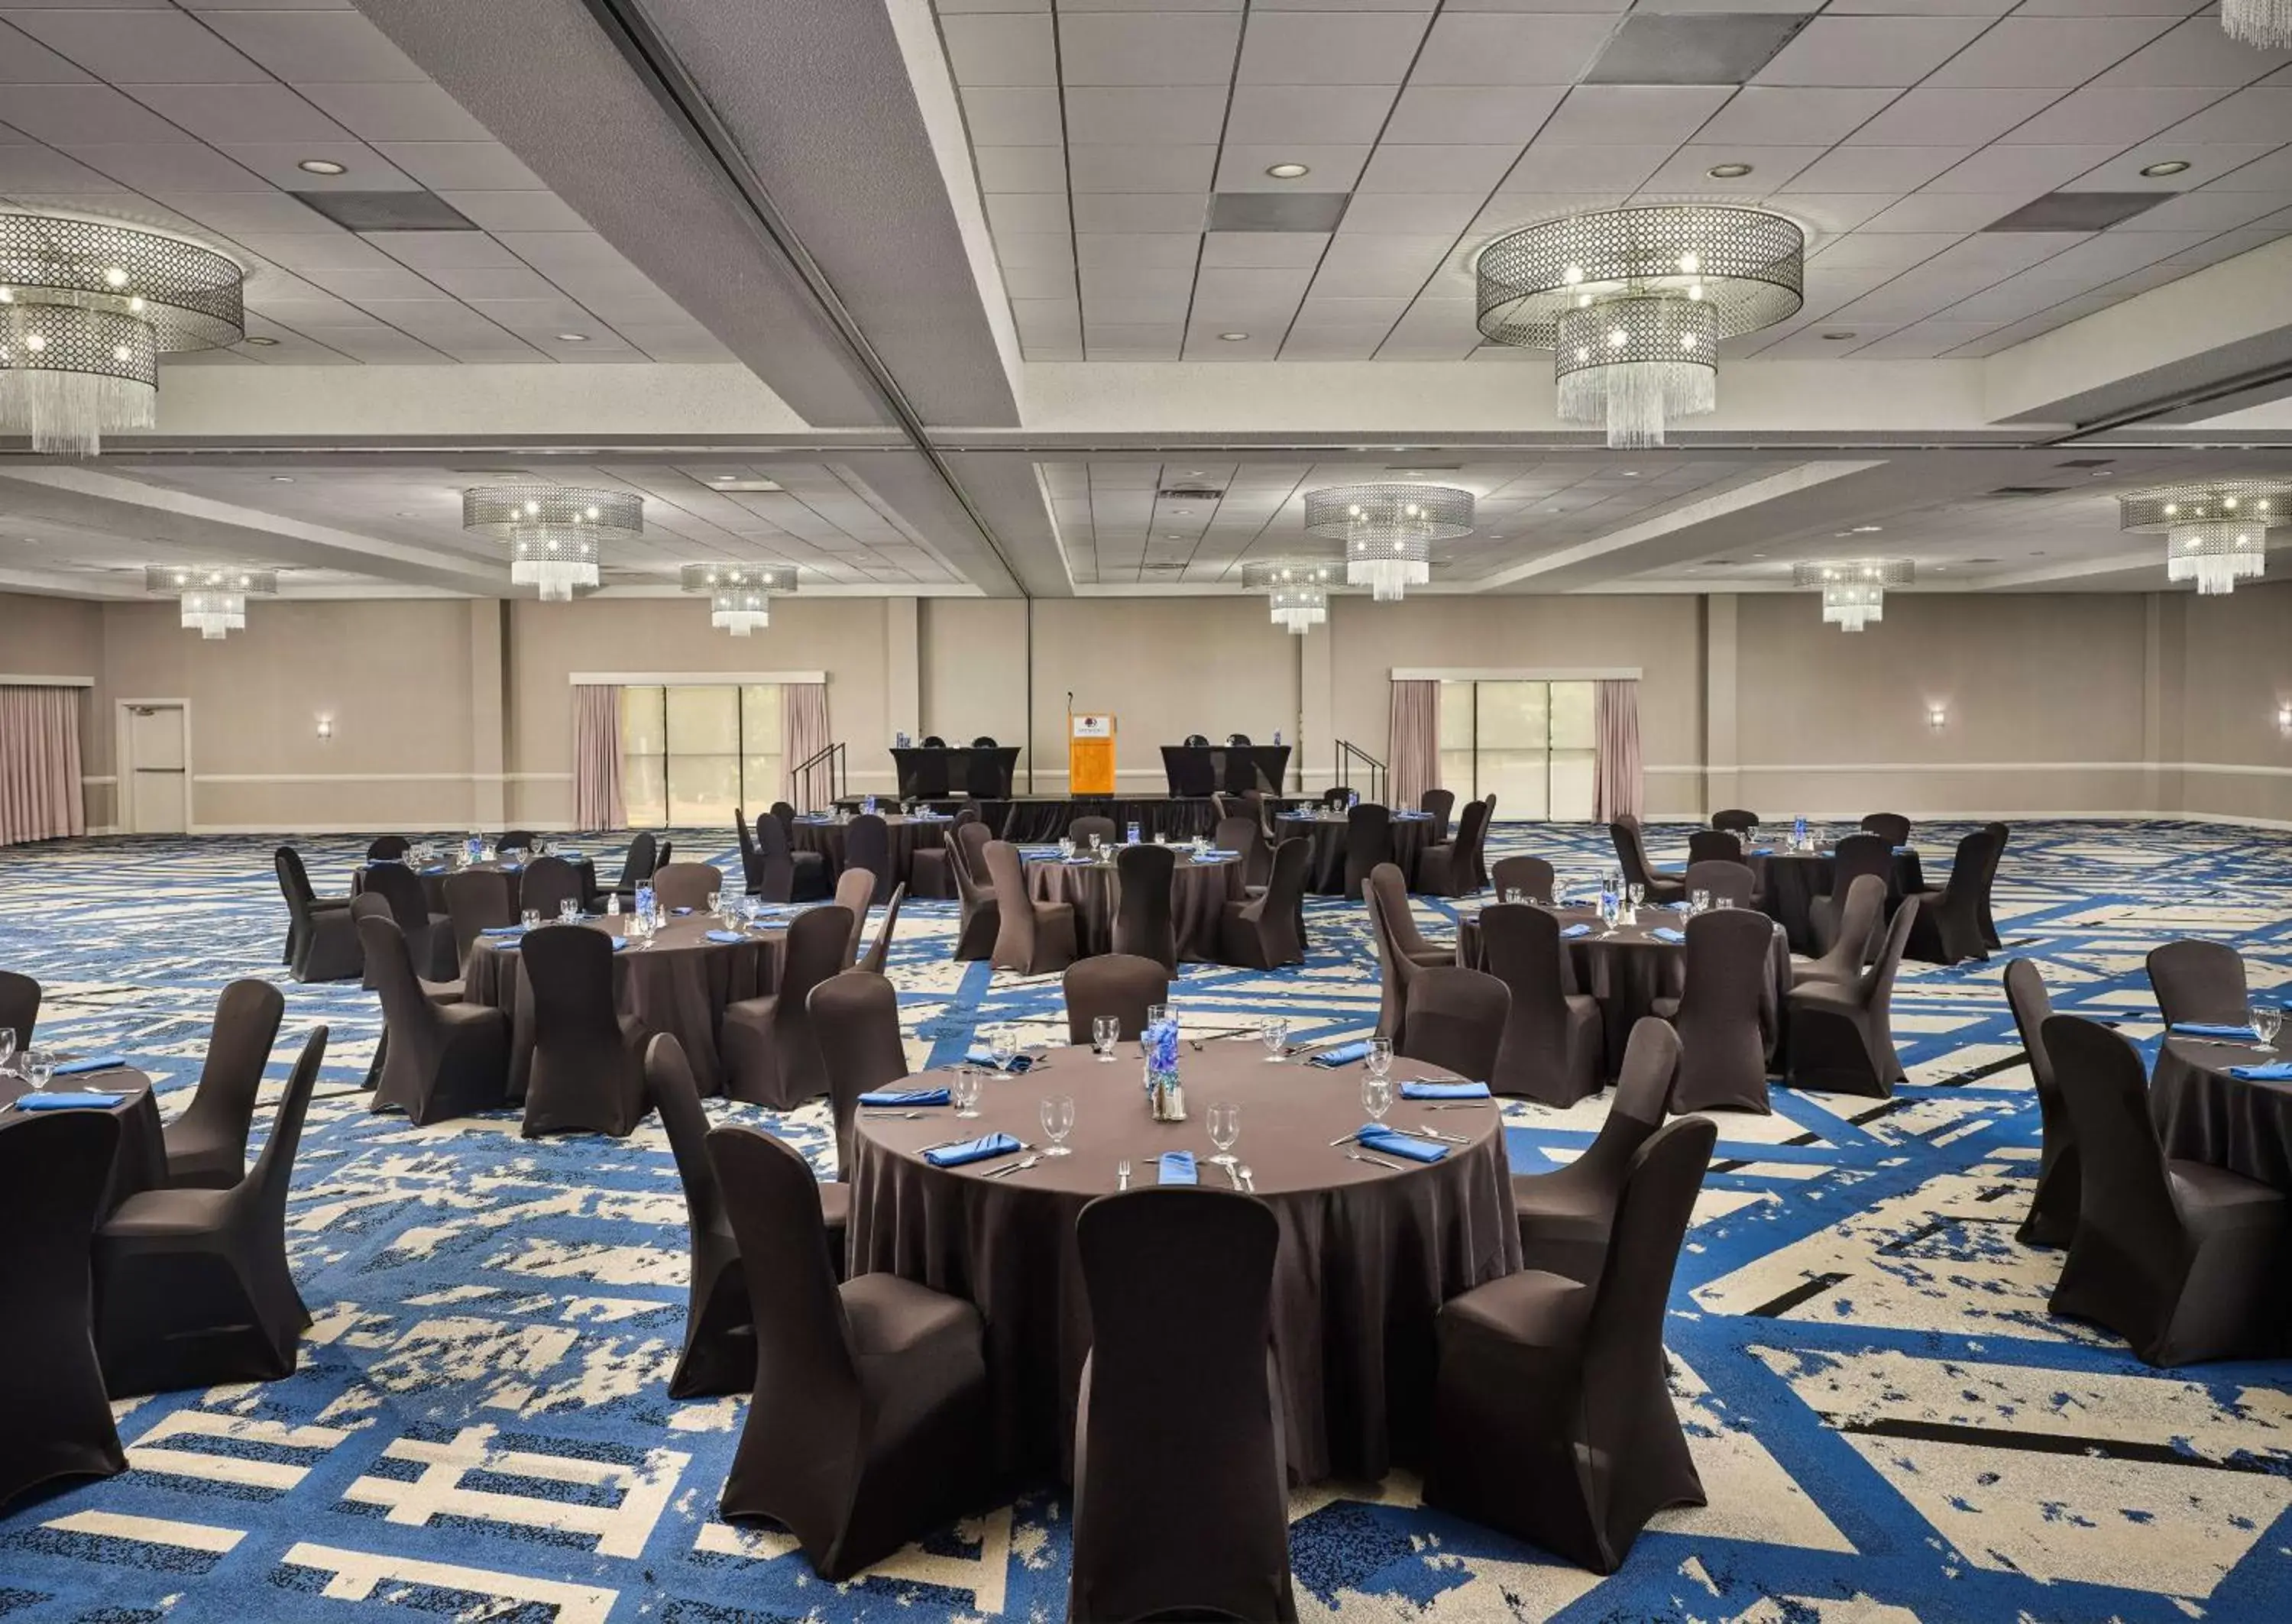 Meeting/conference room, Banquet Facilities in Doubletree by Hilton Hotel Williamsburg